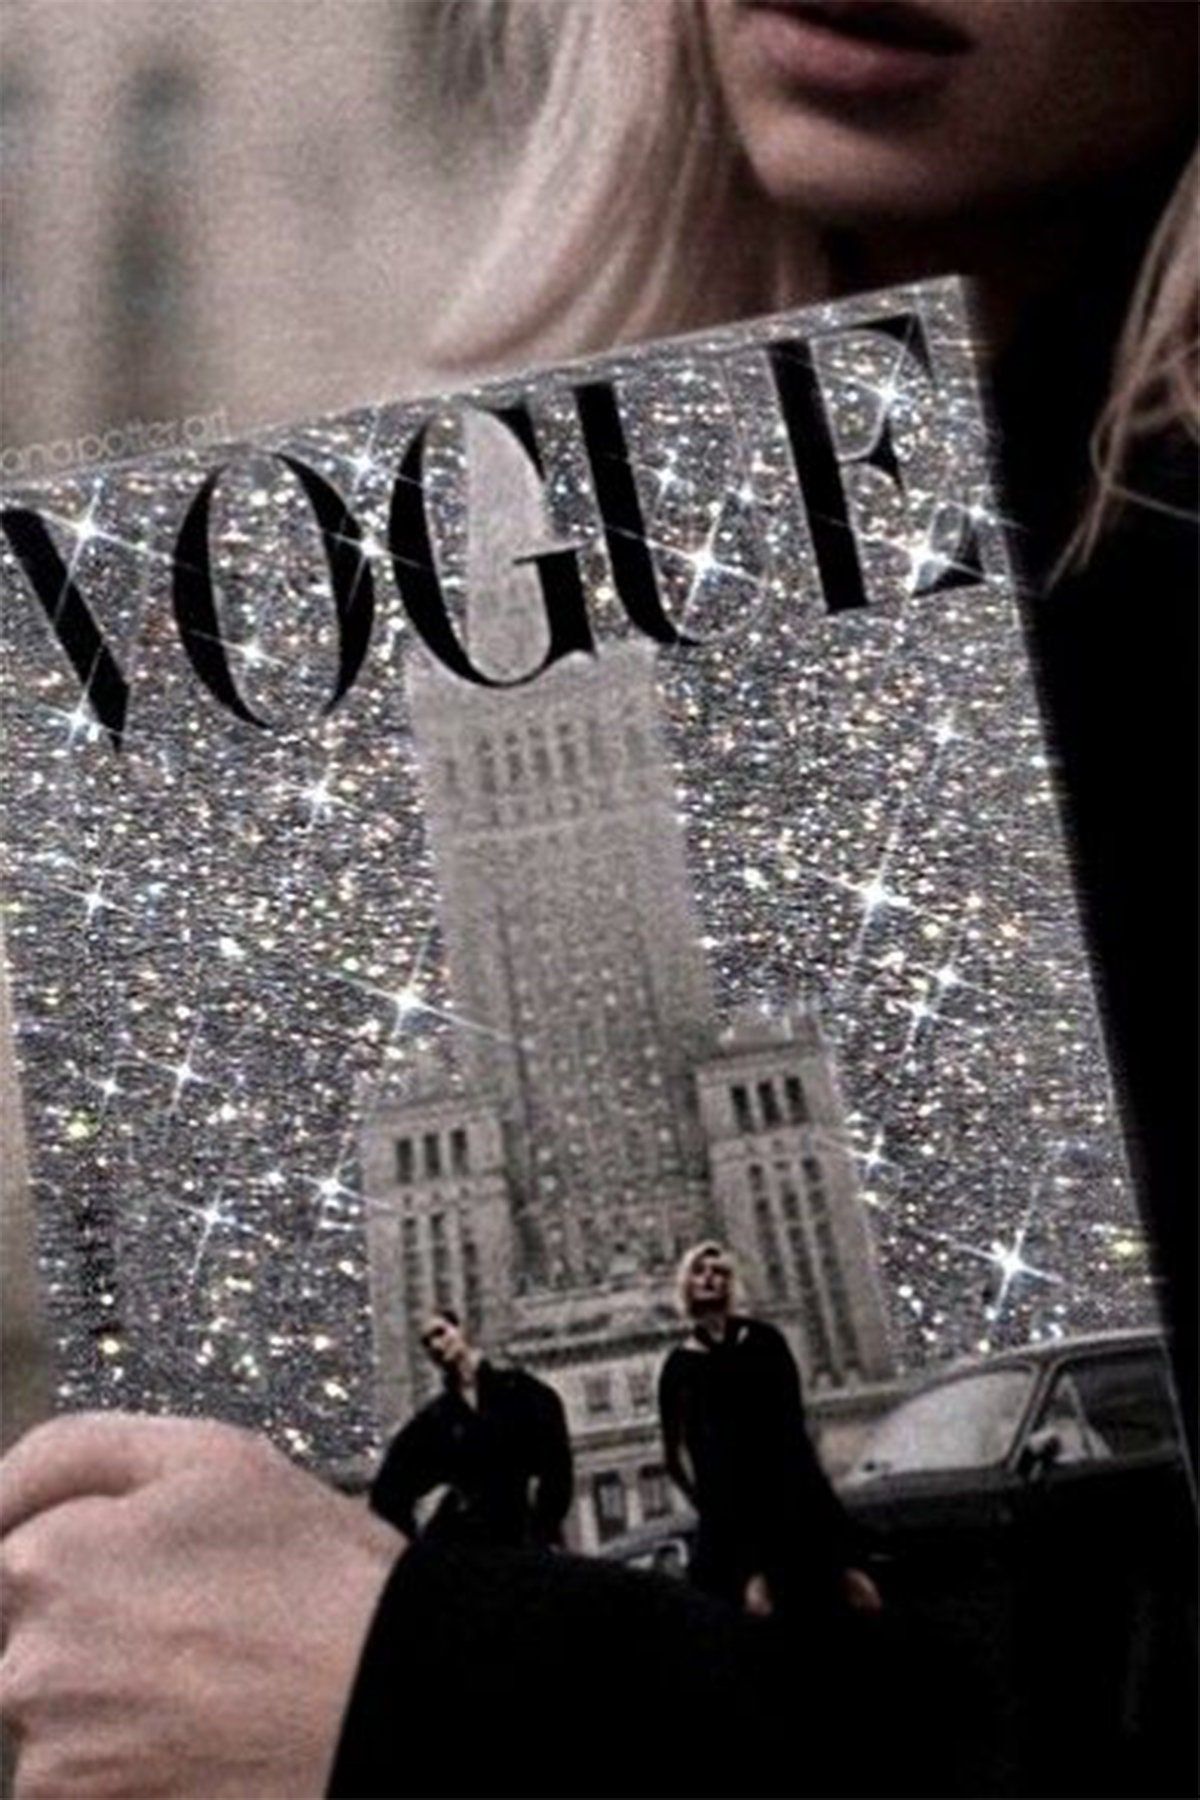 A woman holding a copy of Vogue magazine. - Boujee